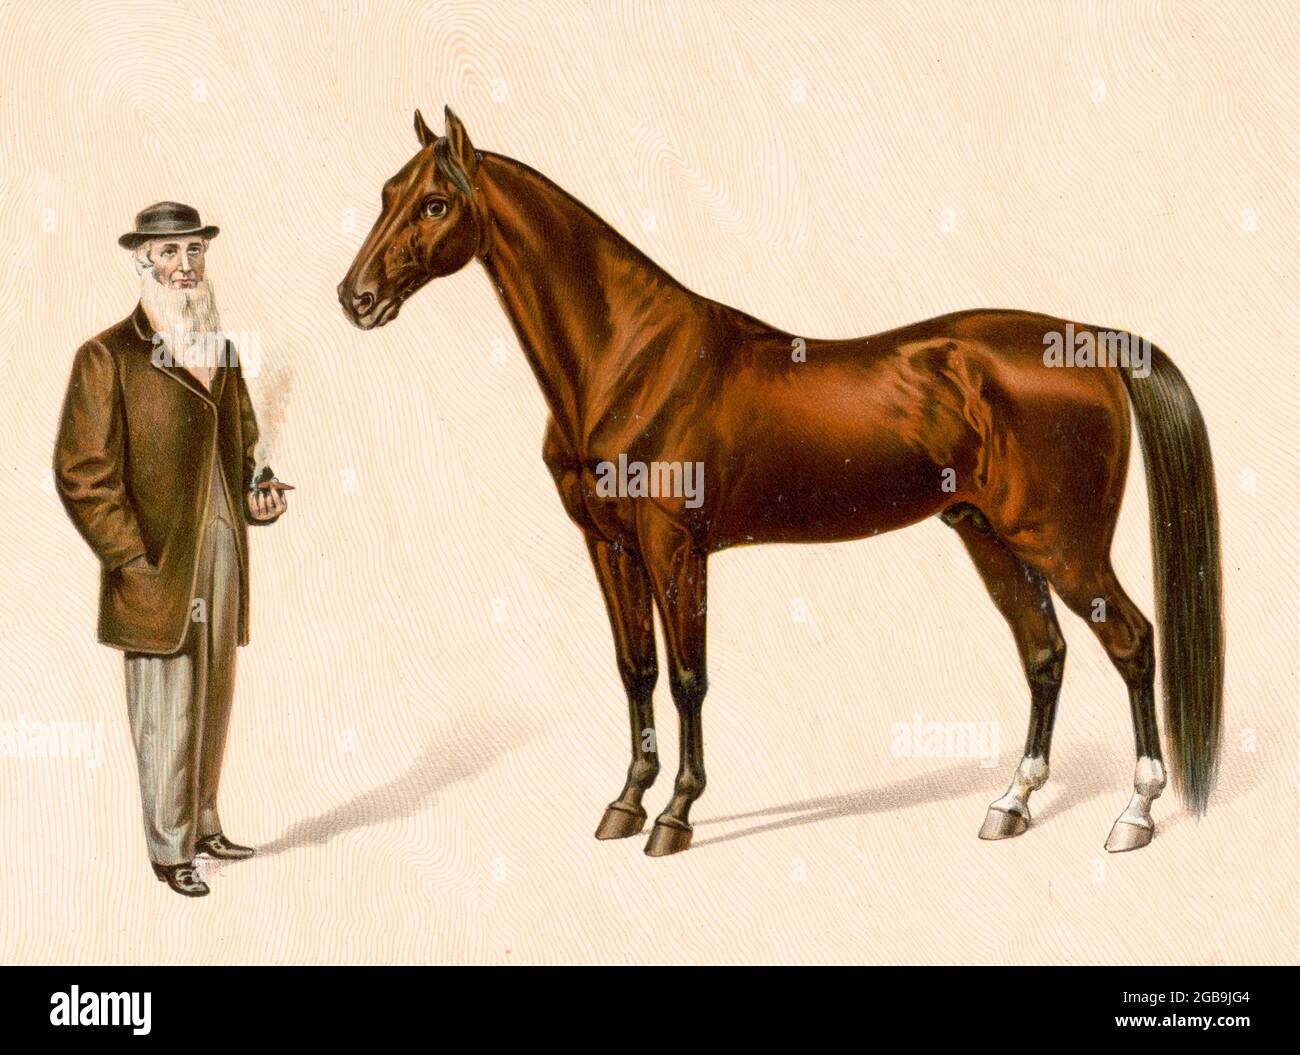 Hambletonian 10, or Rysdyk's Hambletonian, (May 5, 1849 – March 27, 1876) was an American trotter and a founding sire of the Standardbred horse breed. The stallion was born in Sugar Loaf, New York, on 5 May 1849. Hambletonian has been inducted into the Immortals category of the Harness Racing Hall of Fame.  bred by Jonas Seely, Jr., on his farm at Sugar Loaf in Orange County, New York. He was sired by Abdallah, a grandson of the hugely influential Thoroughbred sire, Messenger. Stock Photo